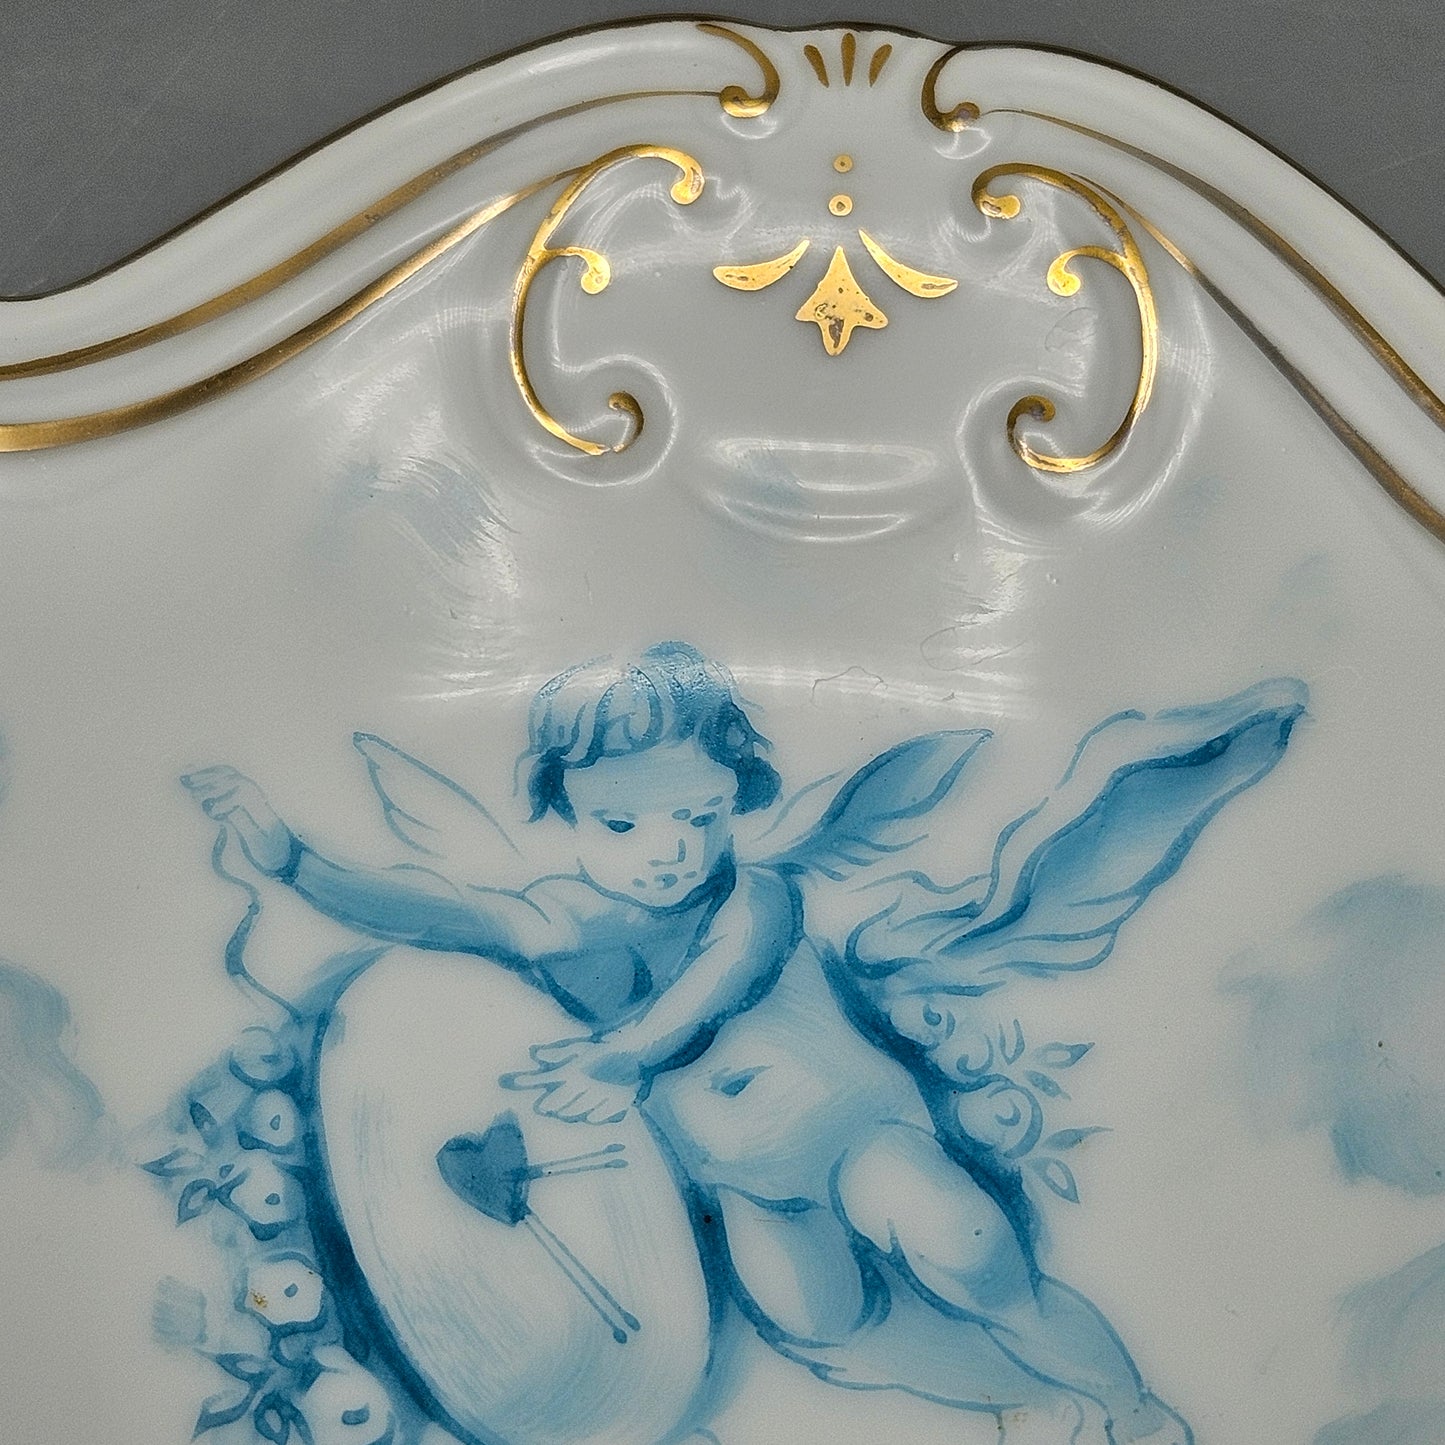 Antique Hand Painted Cherub Plate with Gold Accents